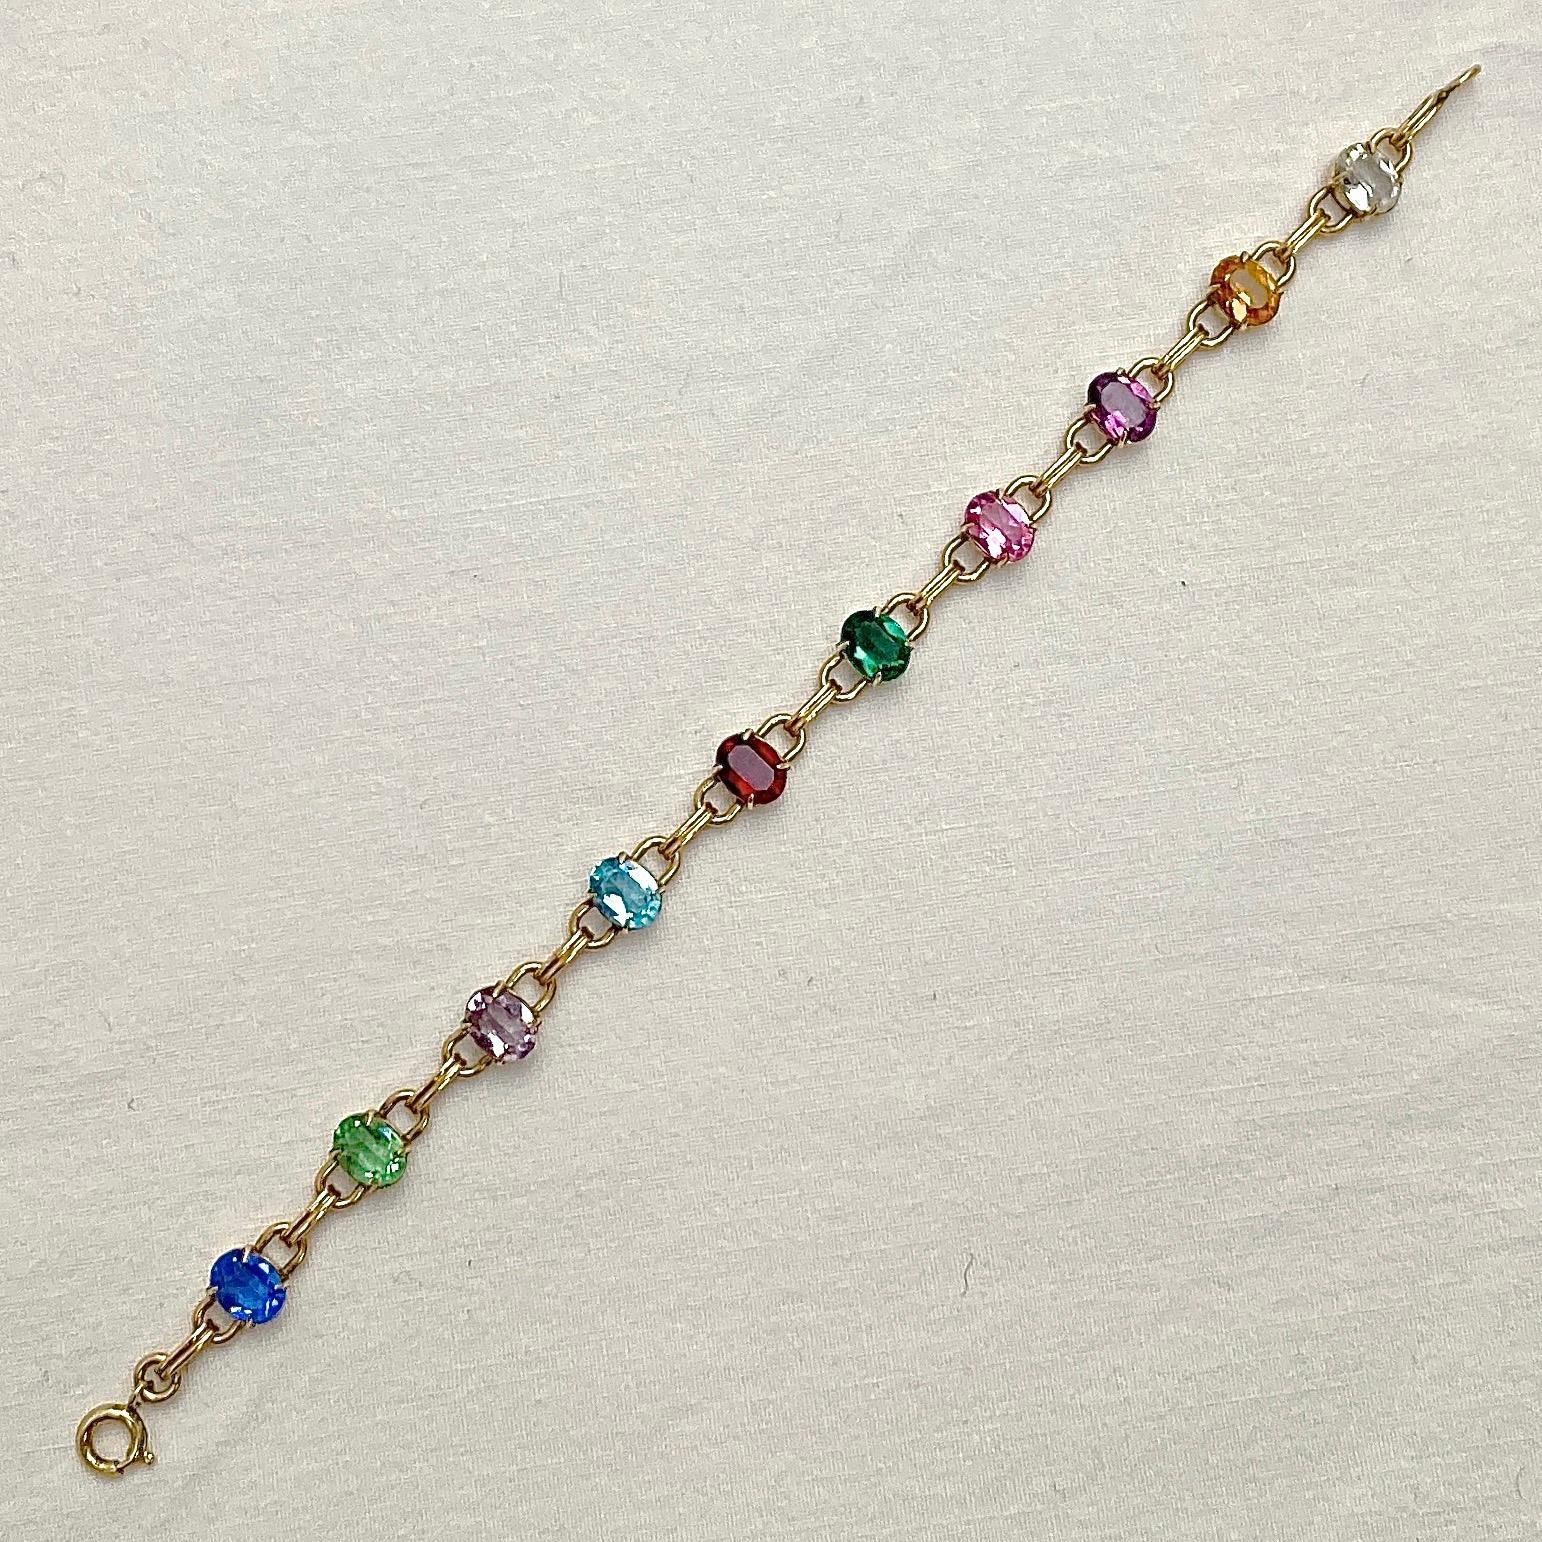 WRE 12K gold filled vintage bracelet, featuring lovely harlequin oval faceted glass links. Length 19.6cm / 7.7 inches by width 7mm / .27 inch. The bracelet is in very good condition. Circa 1950s.

This is a beautiful harlequin link bracelet by